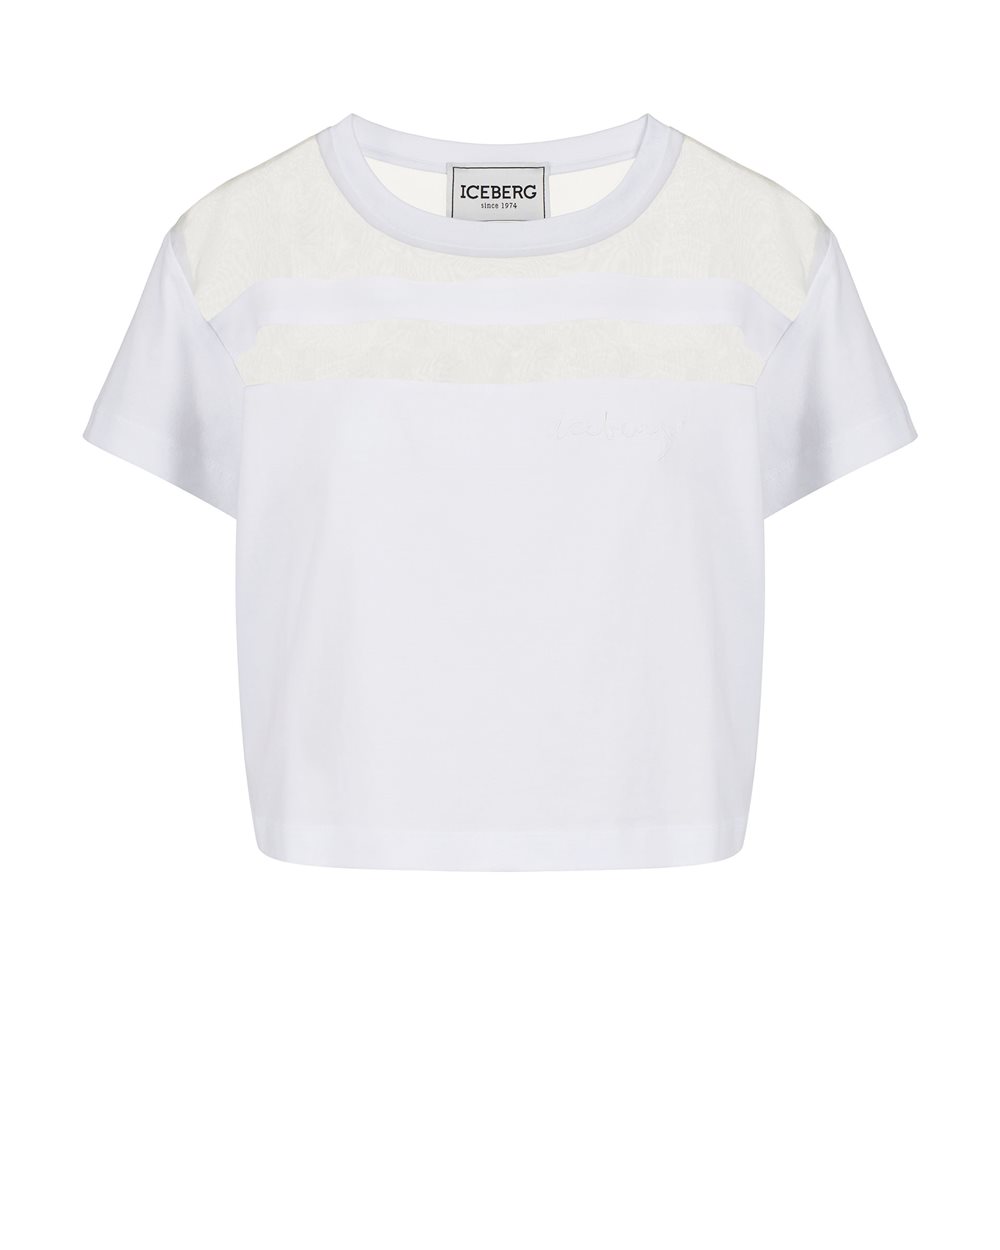 T-shirt in cotone e organza - T-shirts & tops | Iceberg - Official Website